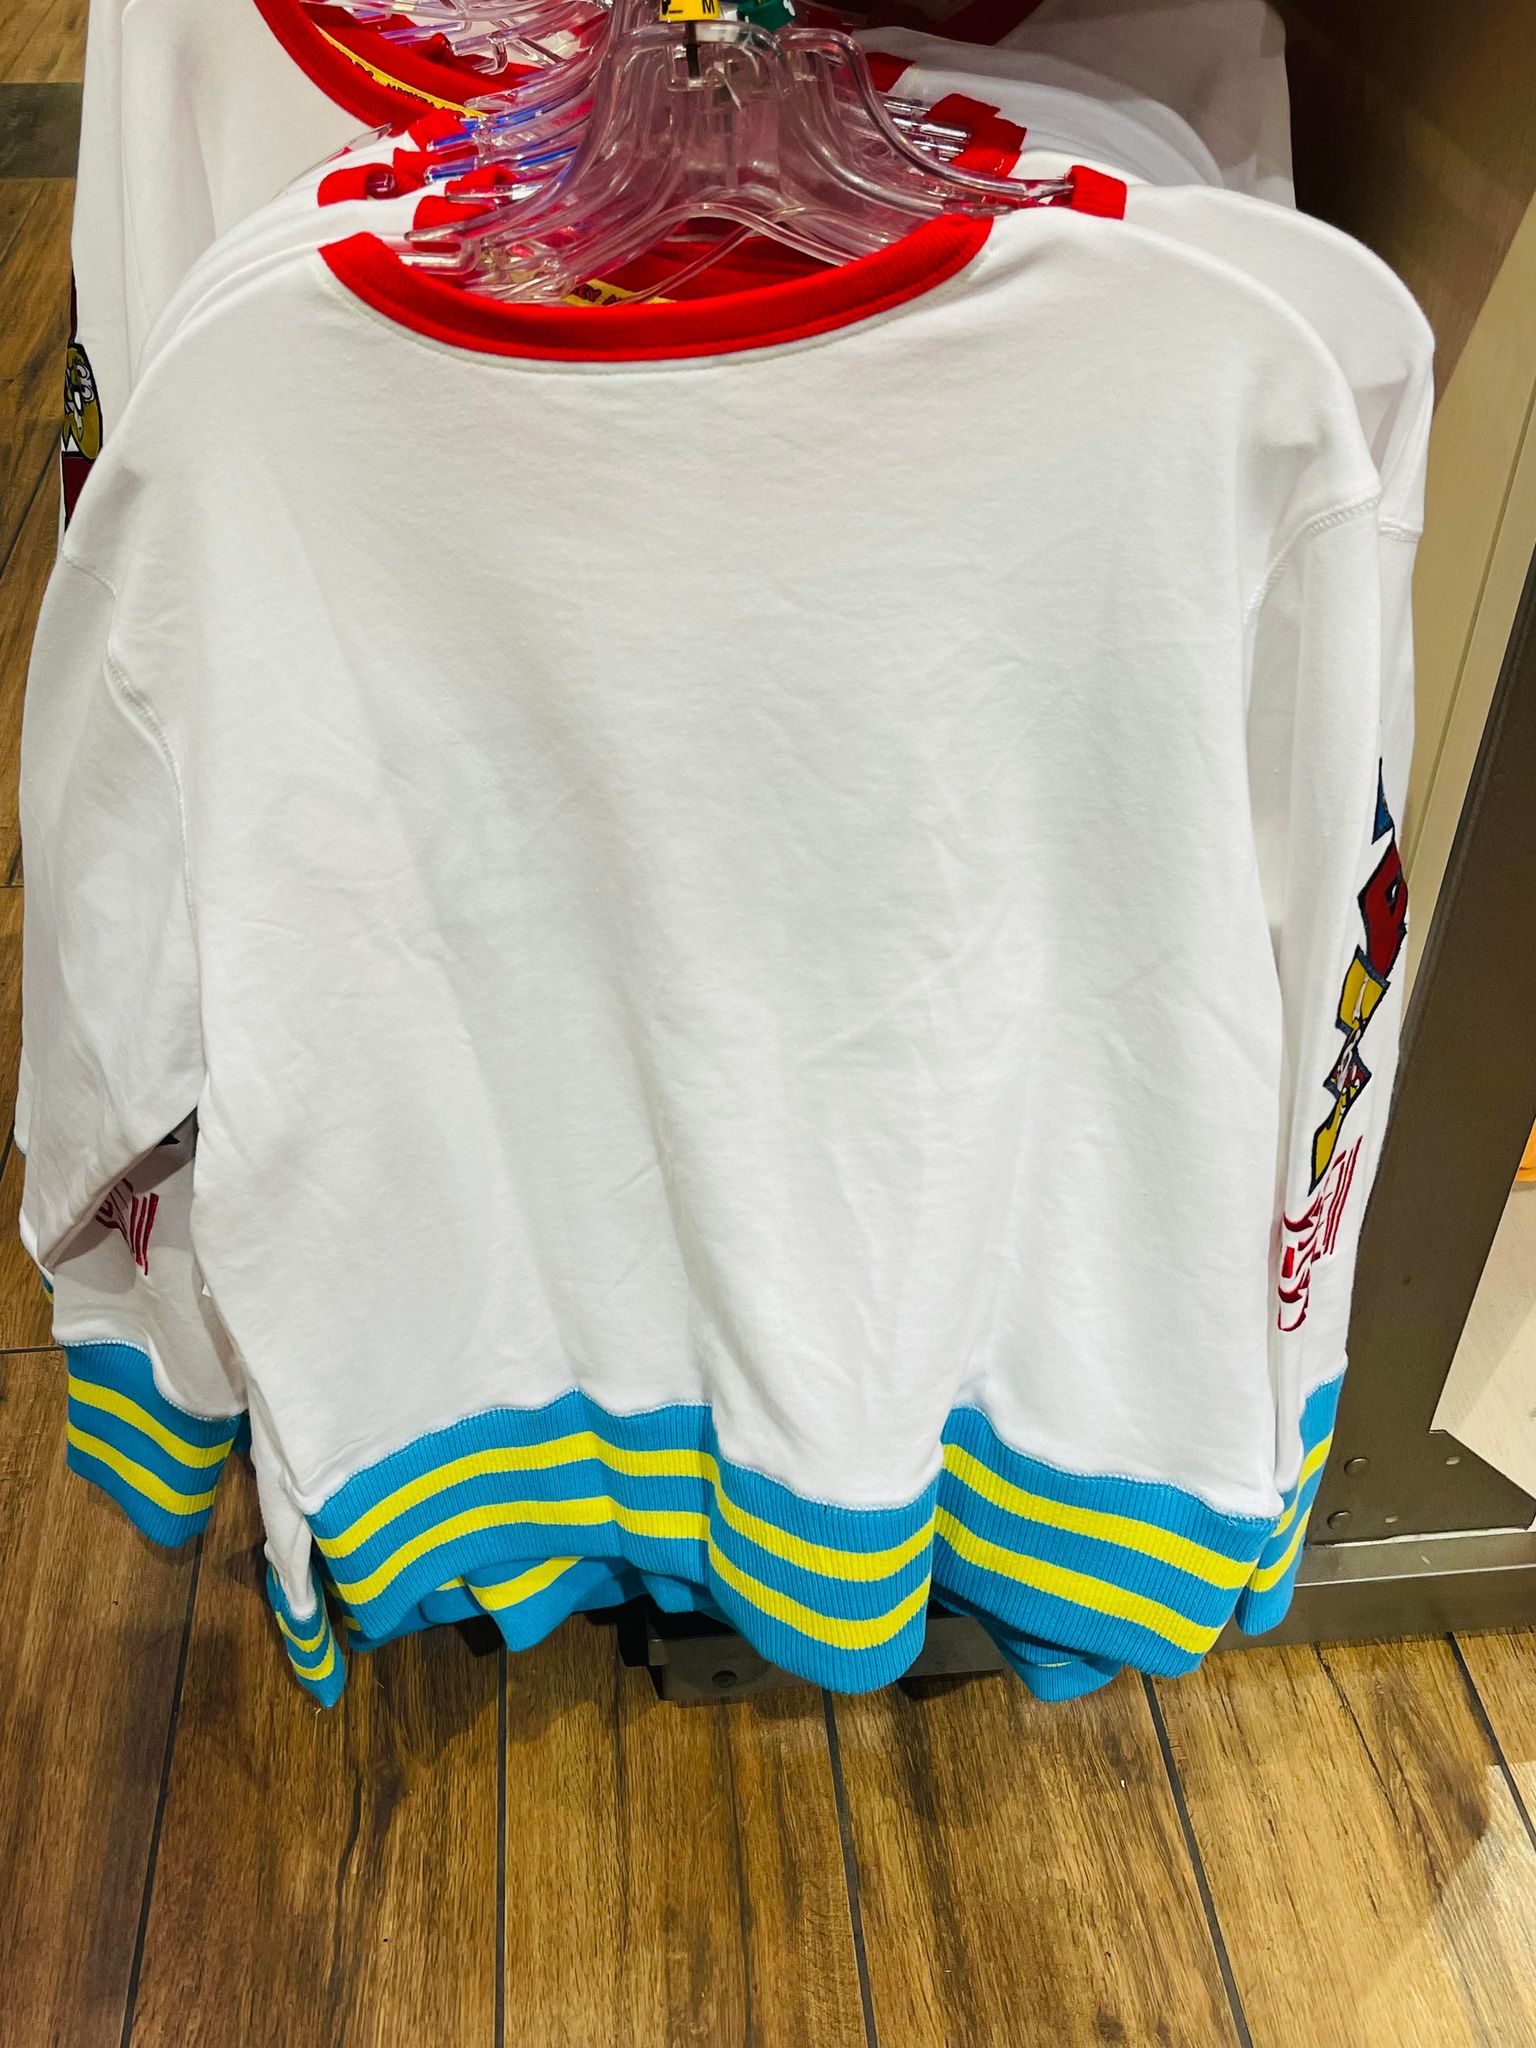 It's All About the Primary Colors With NEW Apparel NOW at World of ...